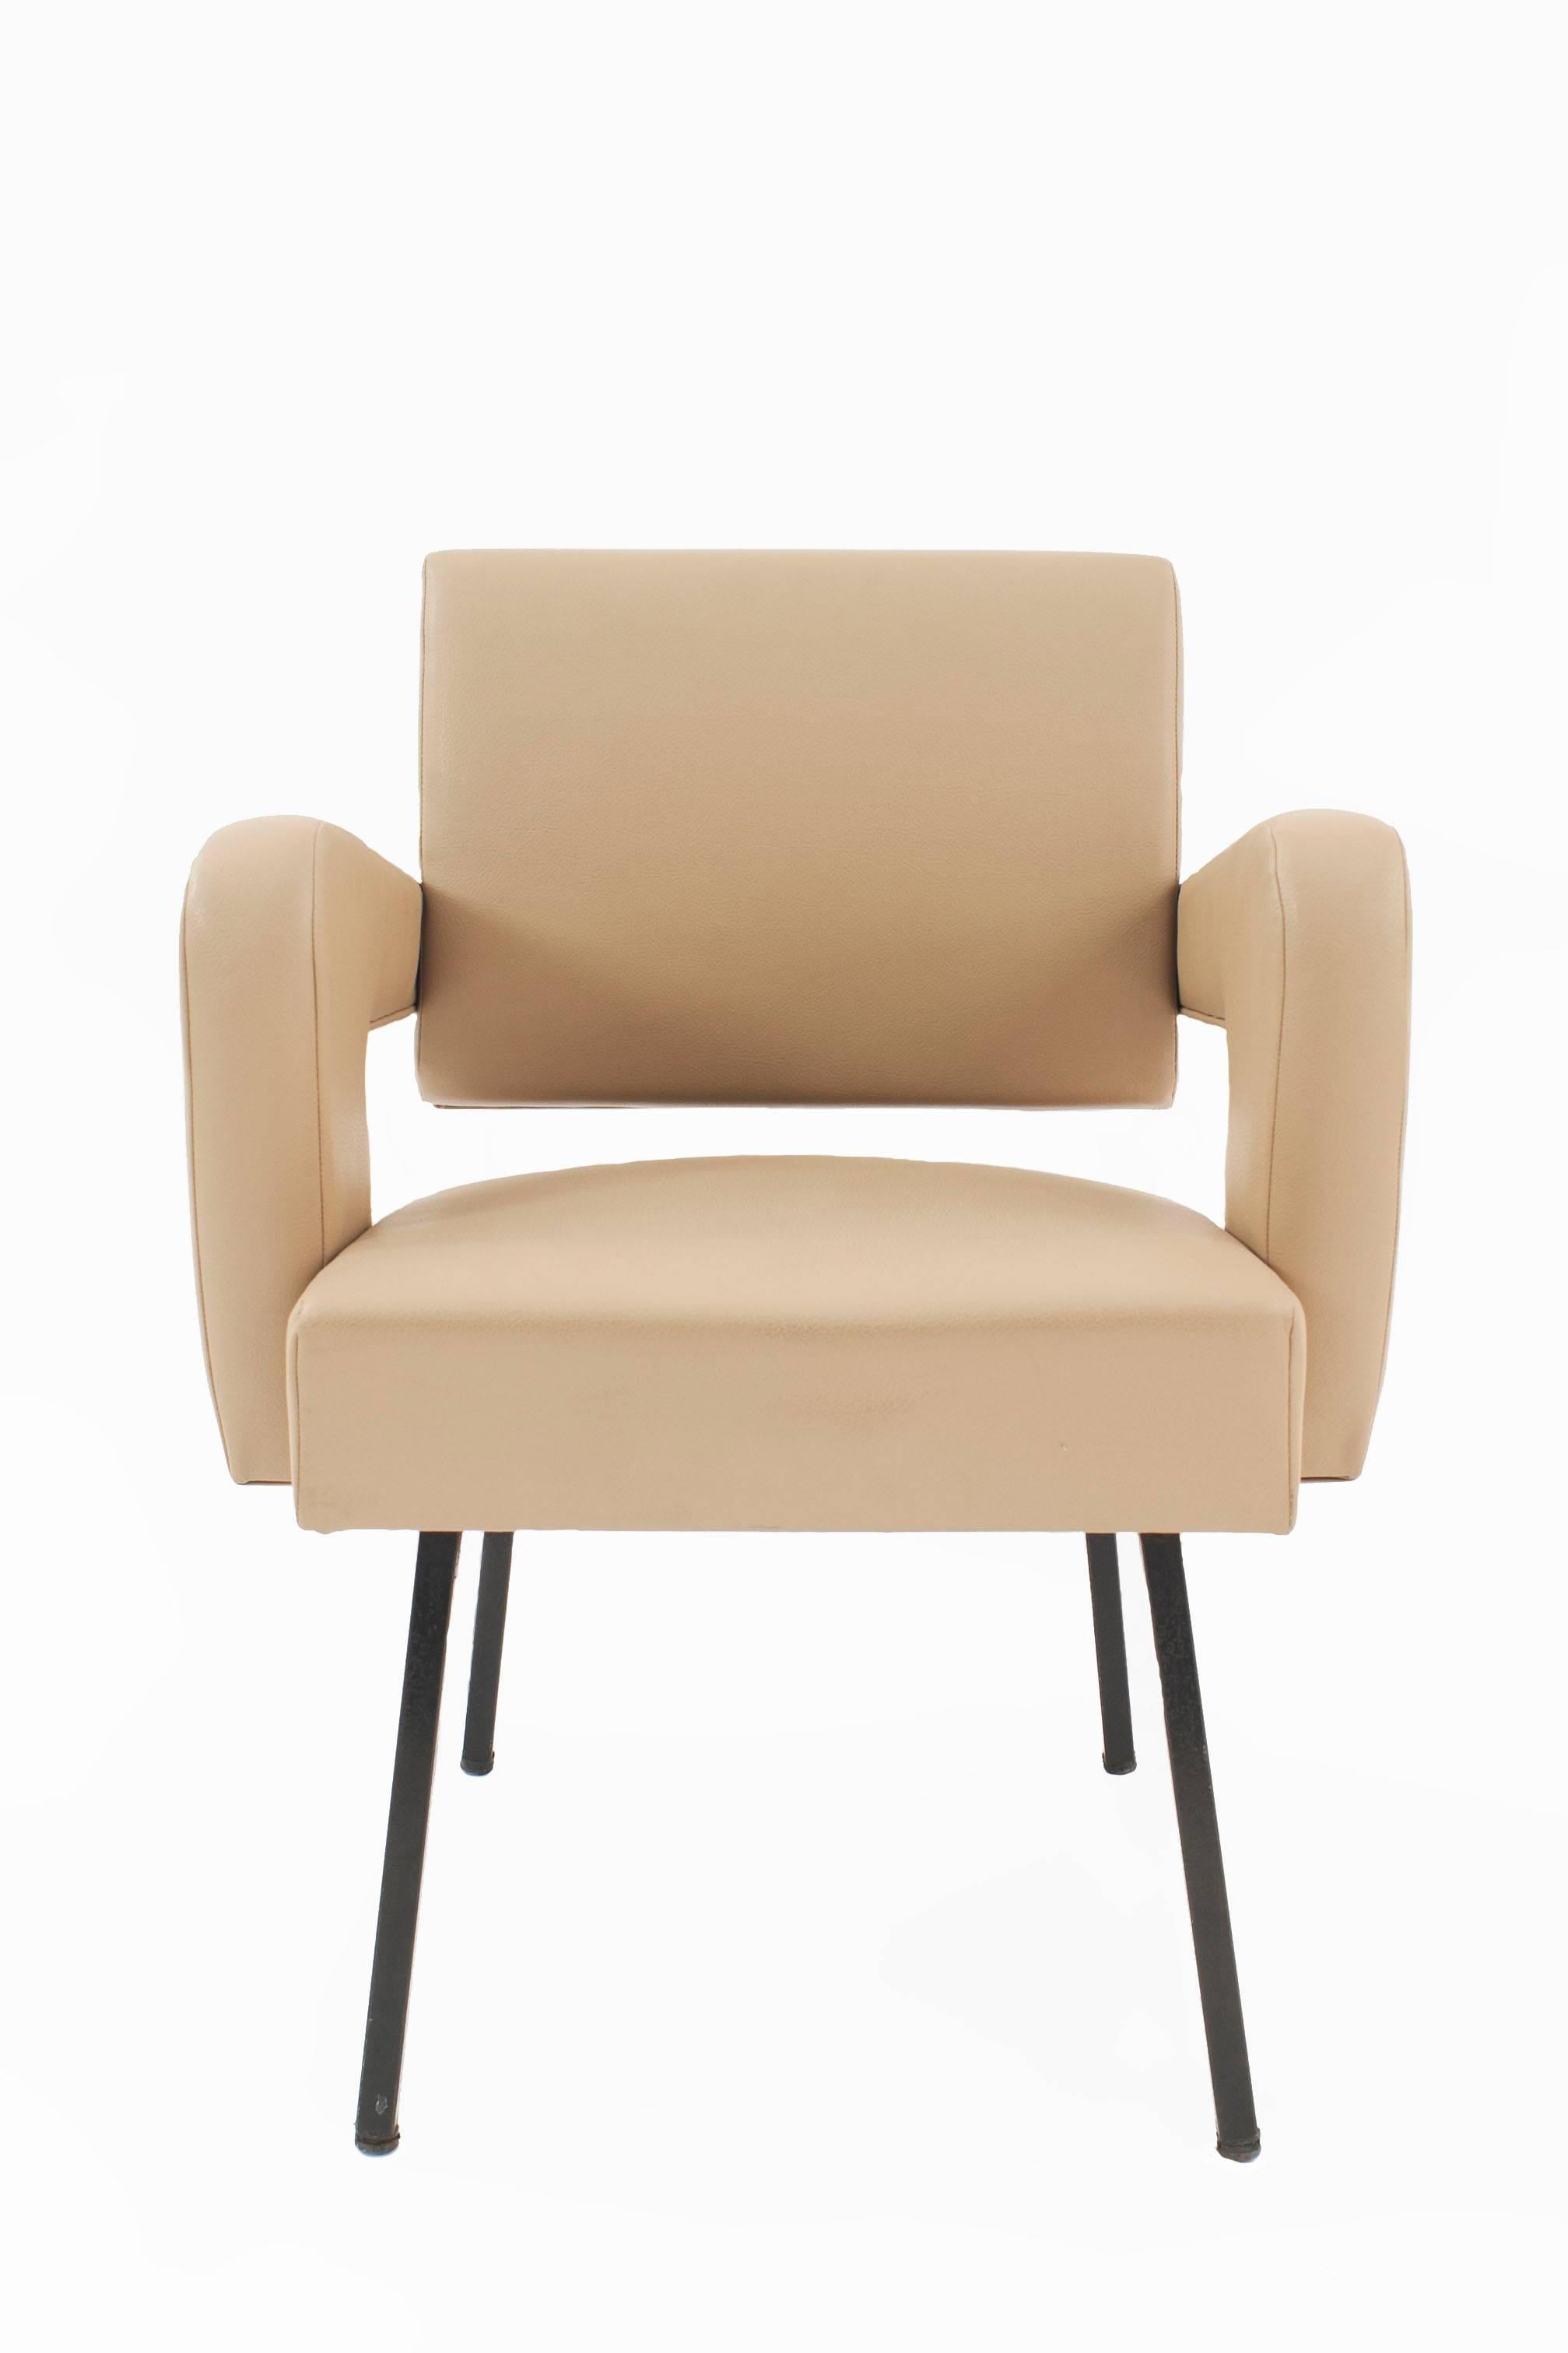 Pair of French midcentury open armchairs upholstered in a light beige leatherette supported on black metal legs (JACQUES ADNET, ref: pg 133 ADNET).

Jacques Adnet is a distinctive figure of French twentieth-century design. Spanning the Art Deco